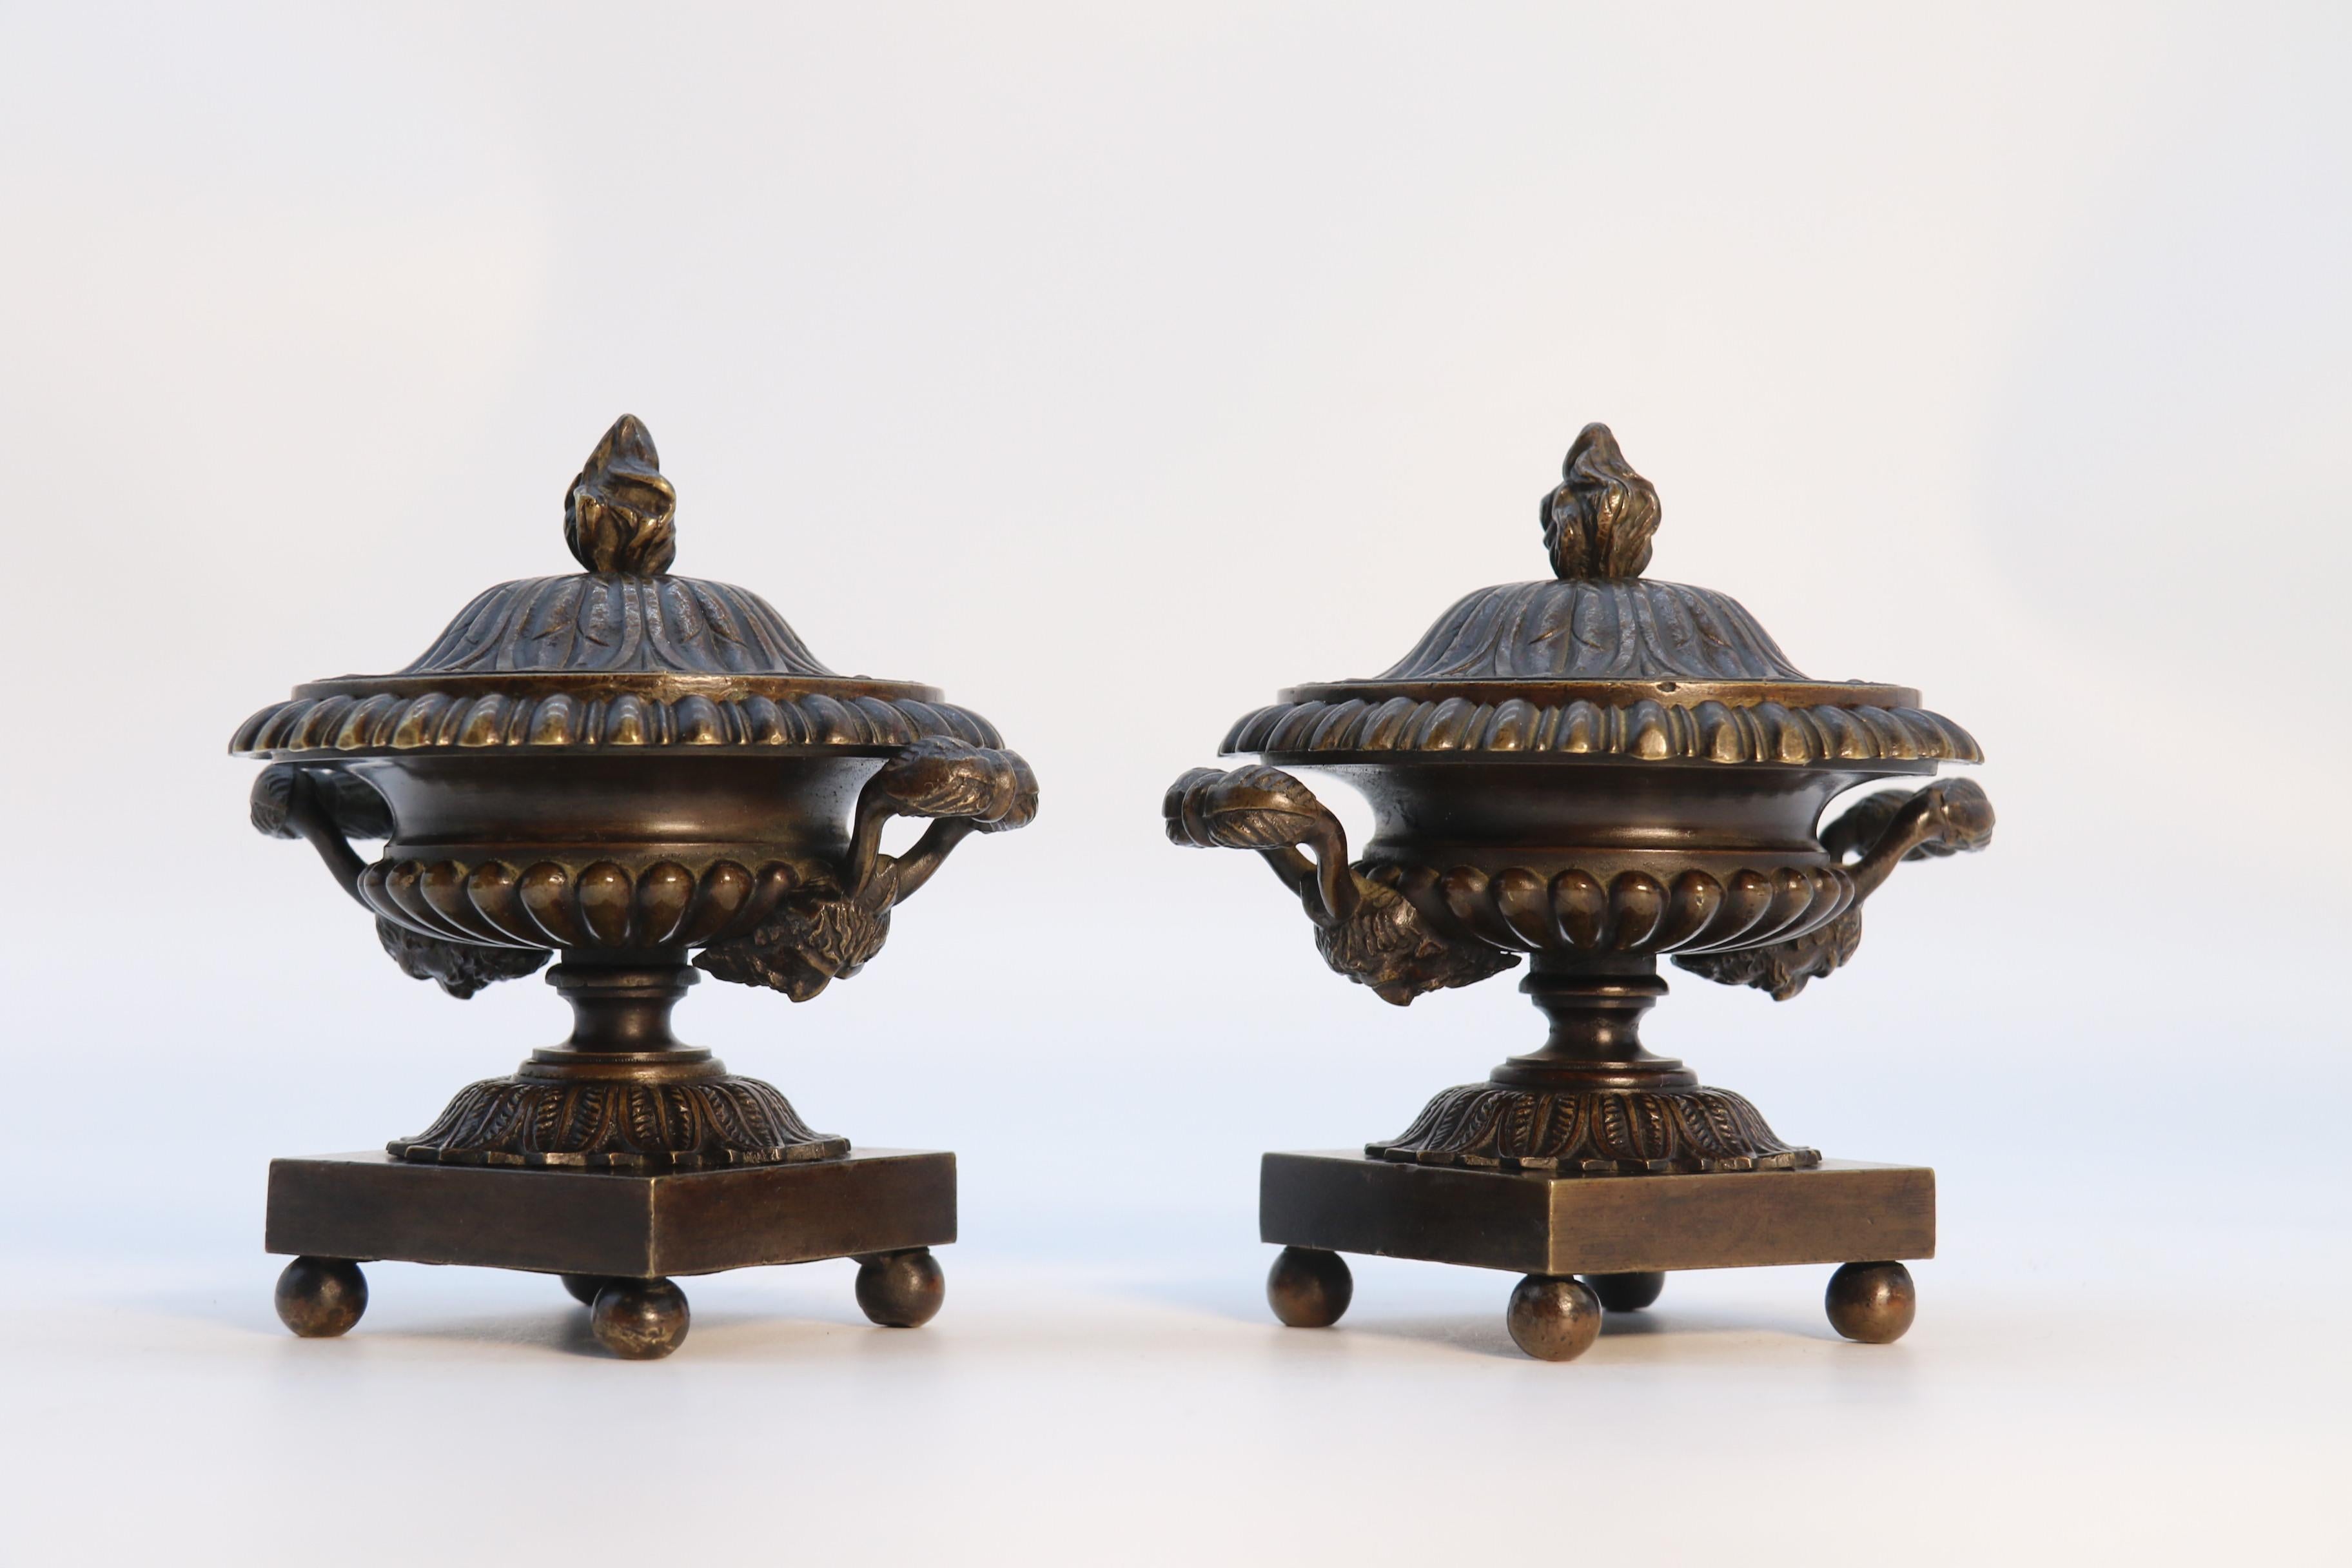 Antique  pair of English Regency period classical bronze urns,  circa 1820 For Sale 2